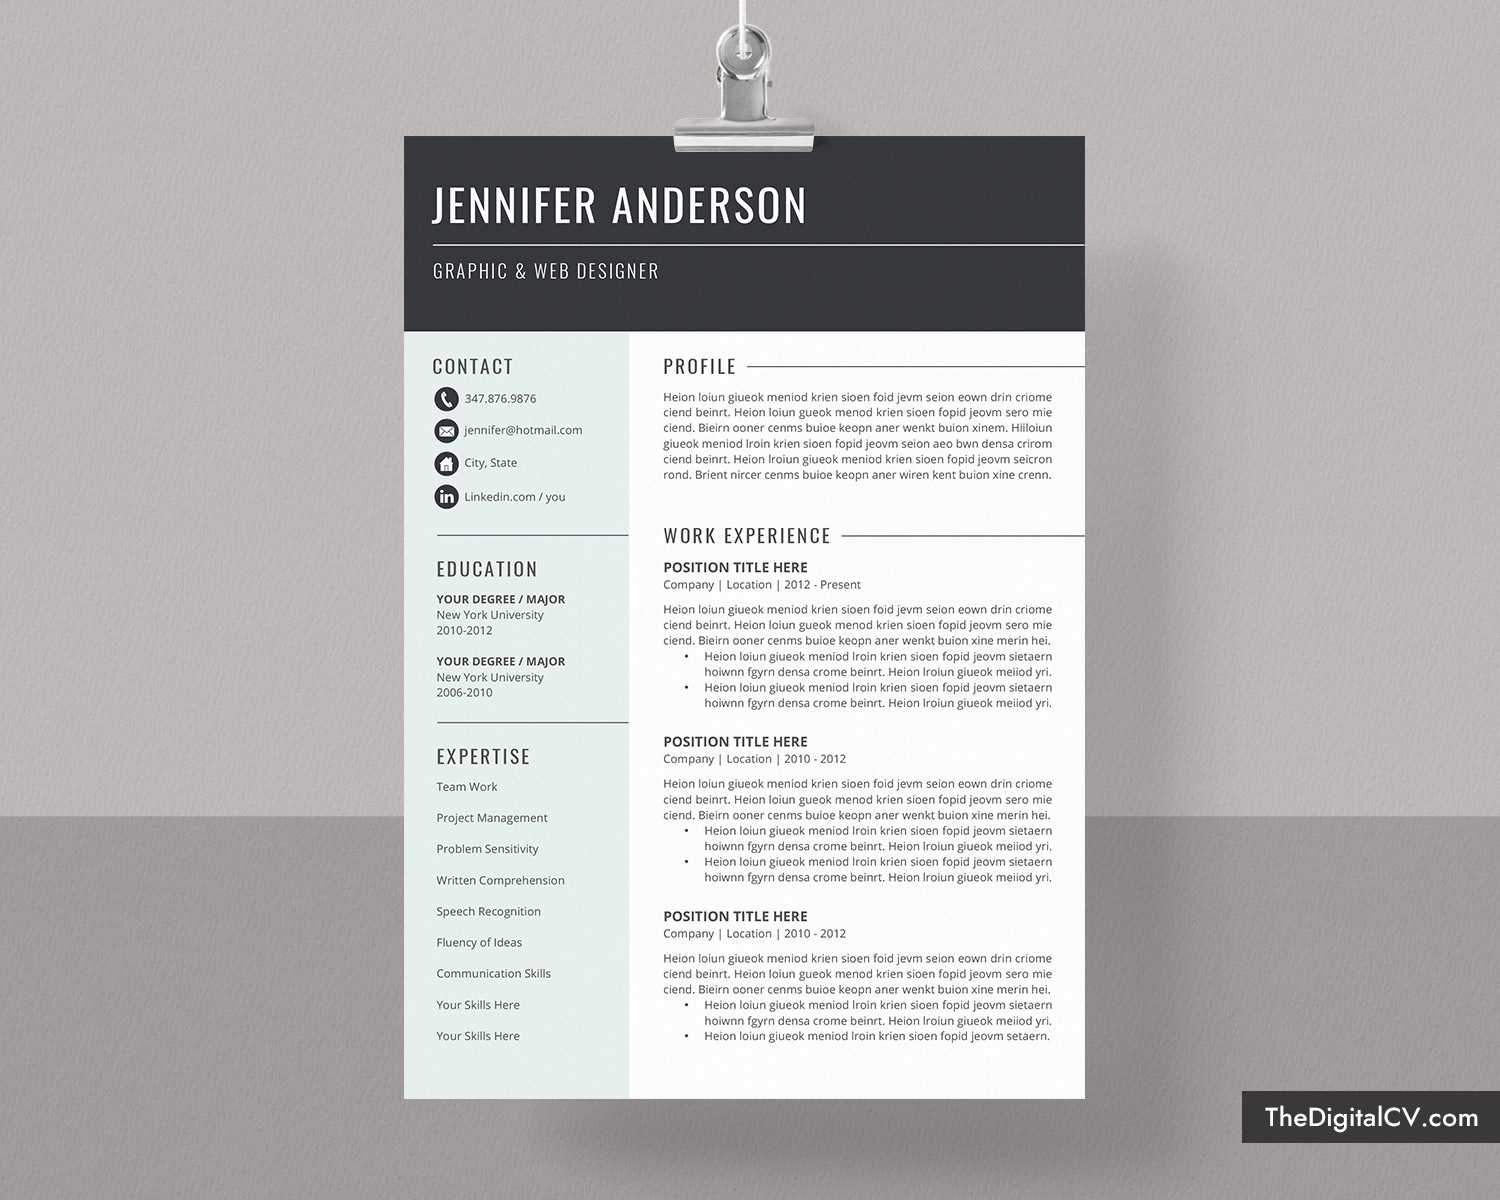 Basic And Simple Resume Template 2019 2020, Cv Template, Cover Letter,  Microsoft Word Resume Template, 1 3 Page, Modern Resume, Creative Resume, Within Microsoft Word Resumes Templates